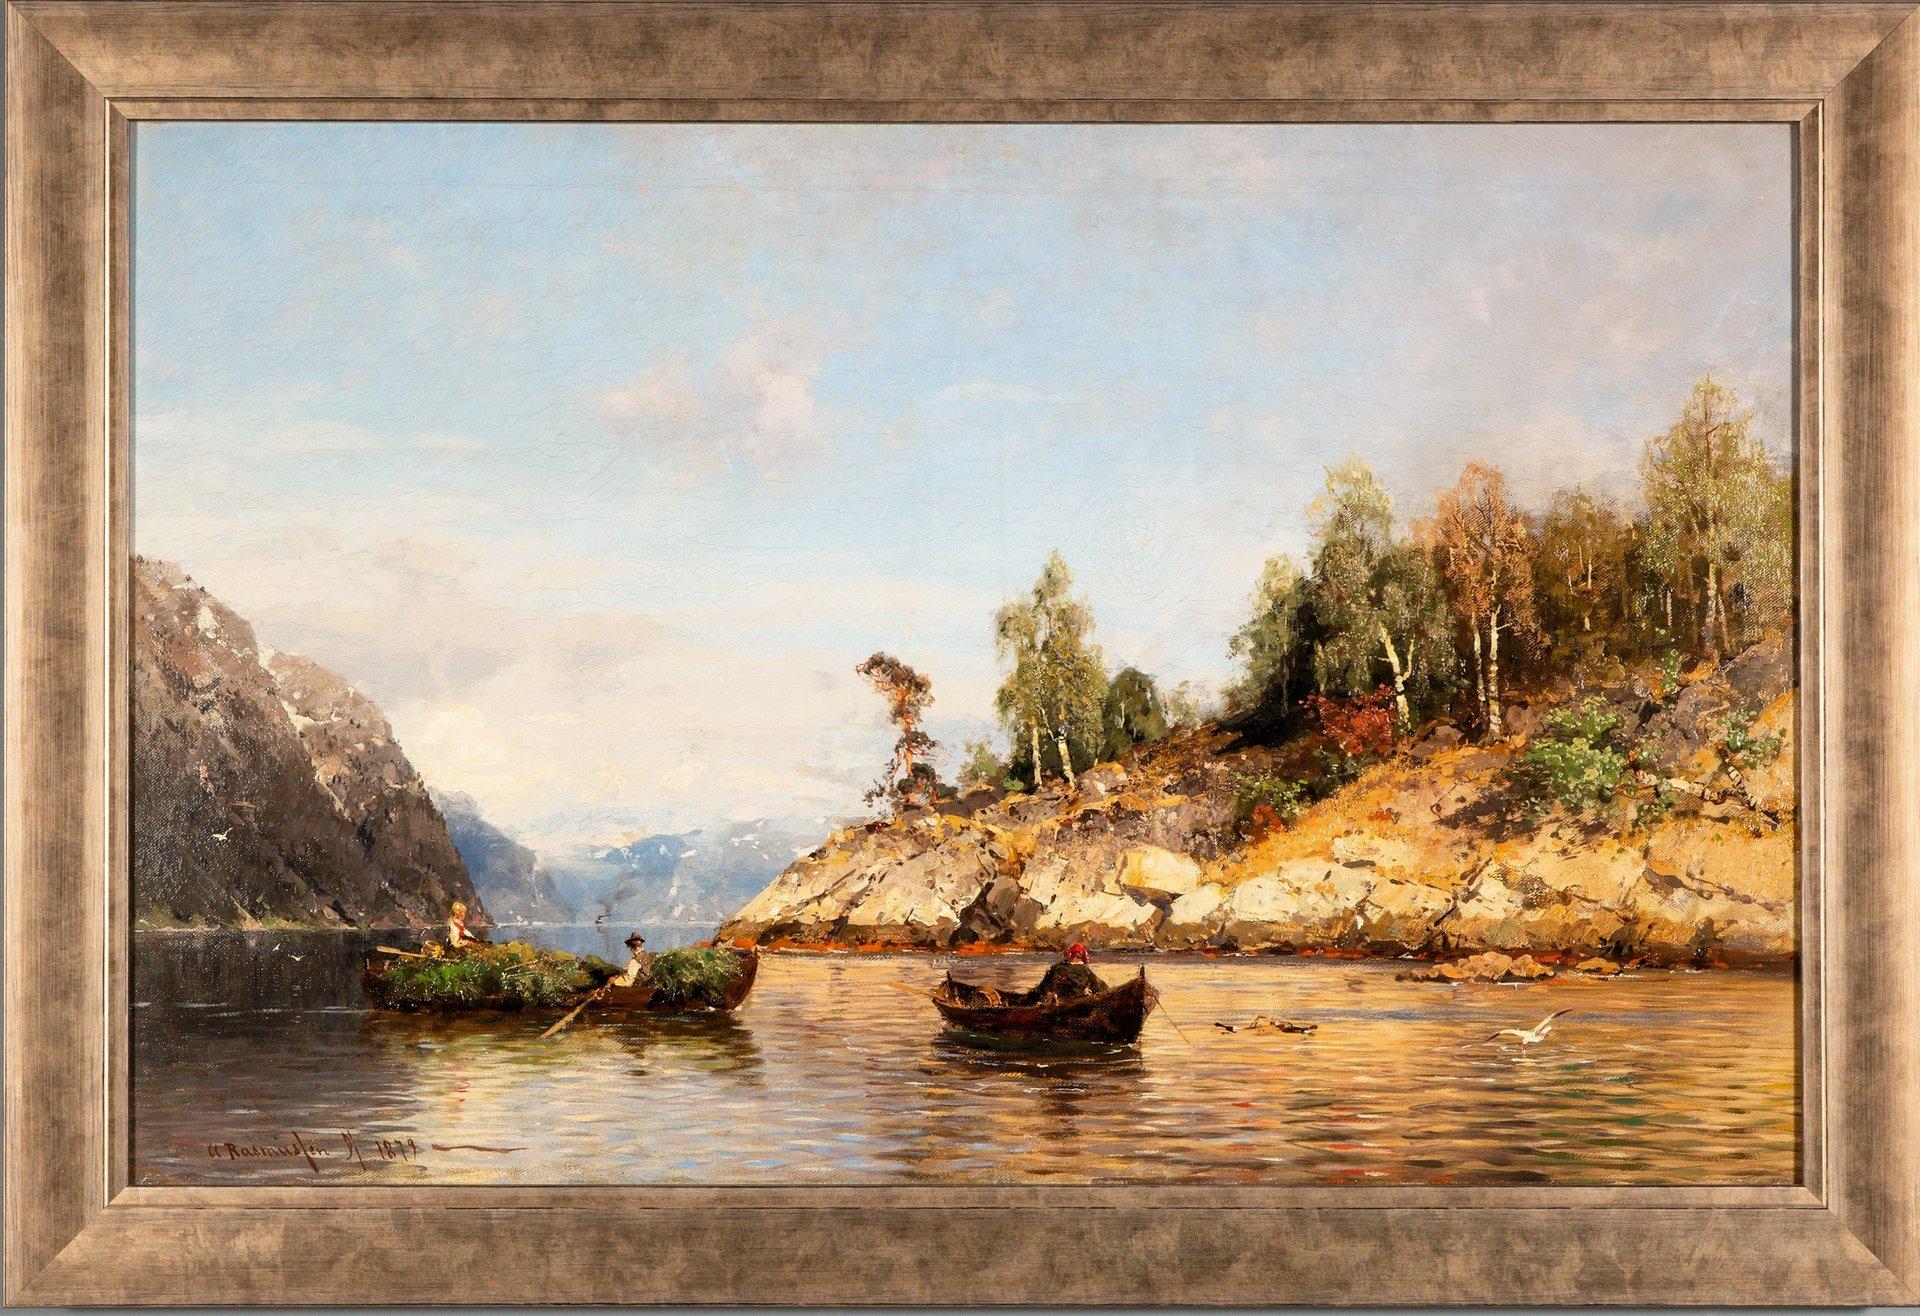 Summer in the fjords, Oil on canvas by Georg Anton Rasmussen, 1842 - 1912 For Sale 1